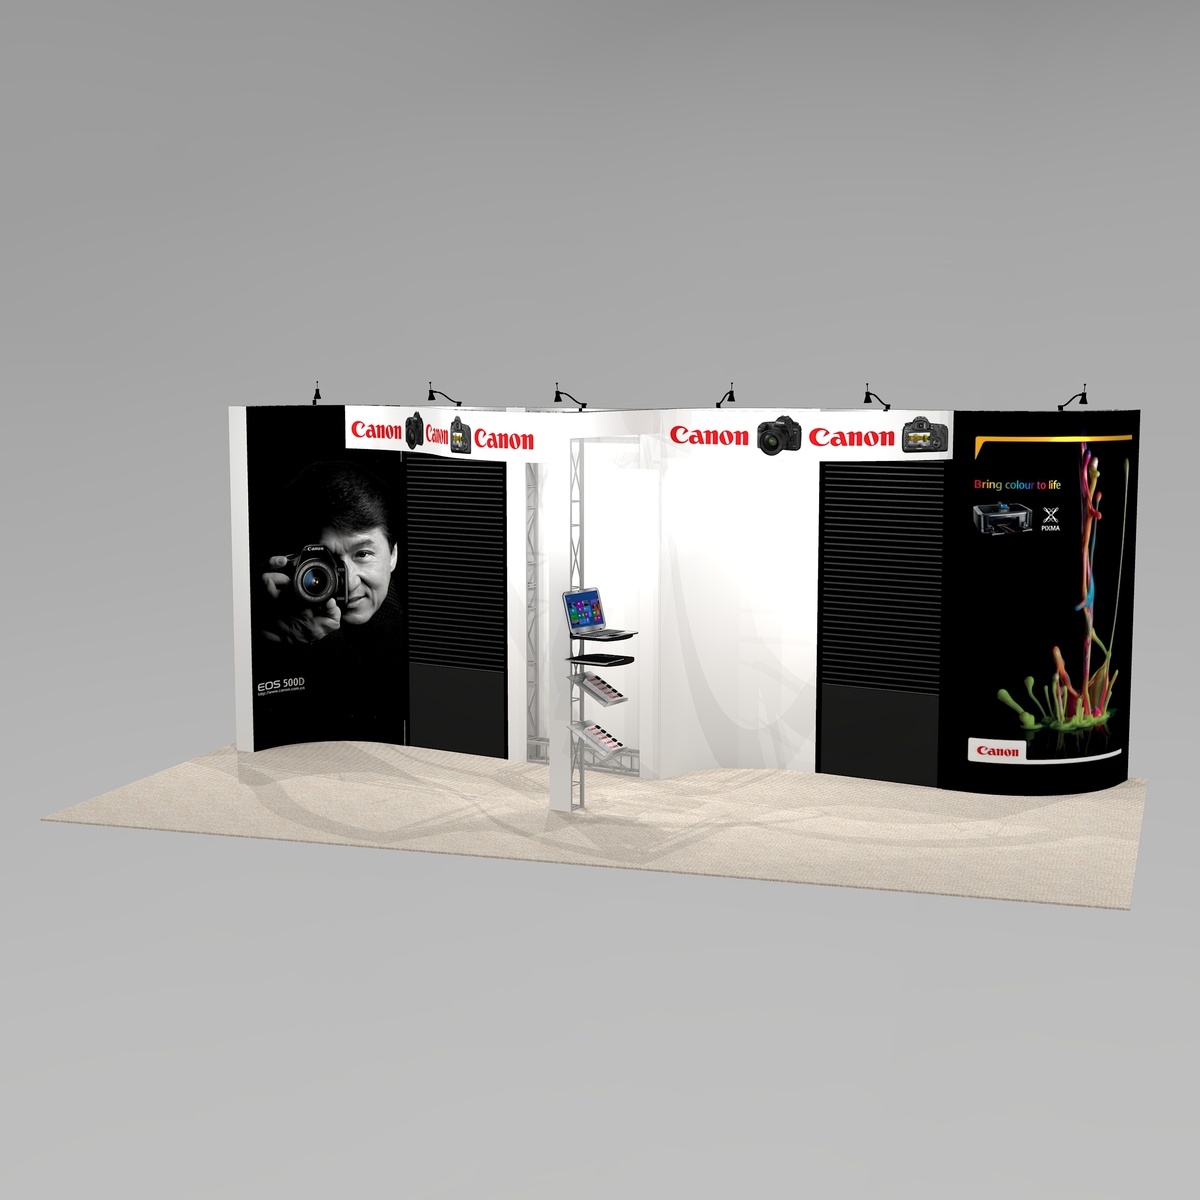 Curved slat wall trade show exhibit design NAP1020 Graphic Package B